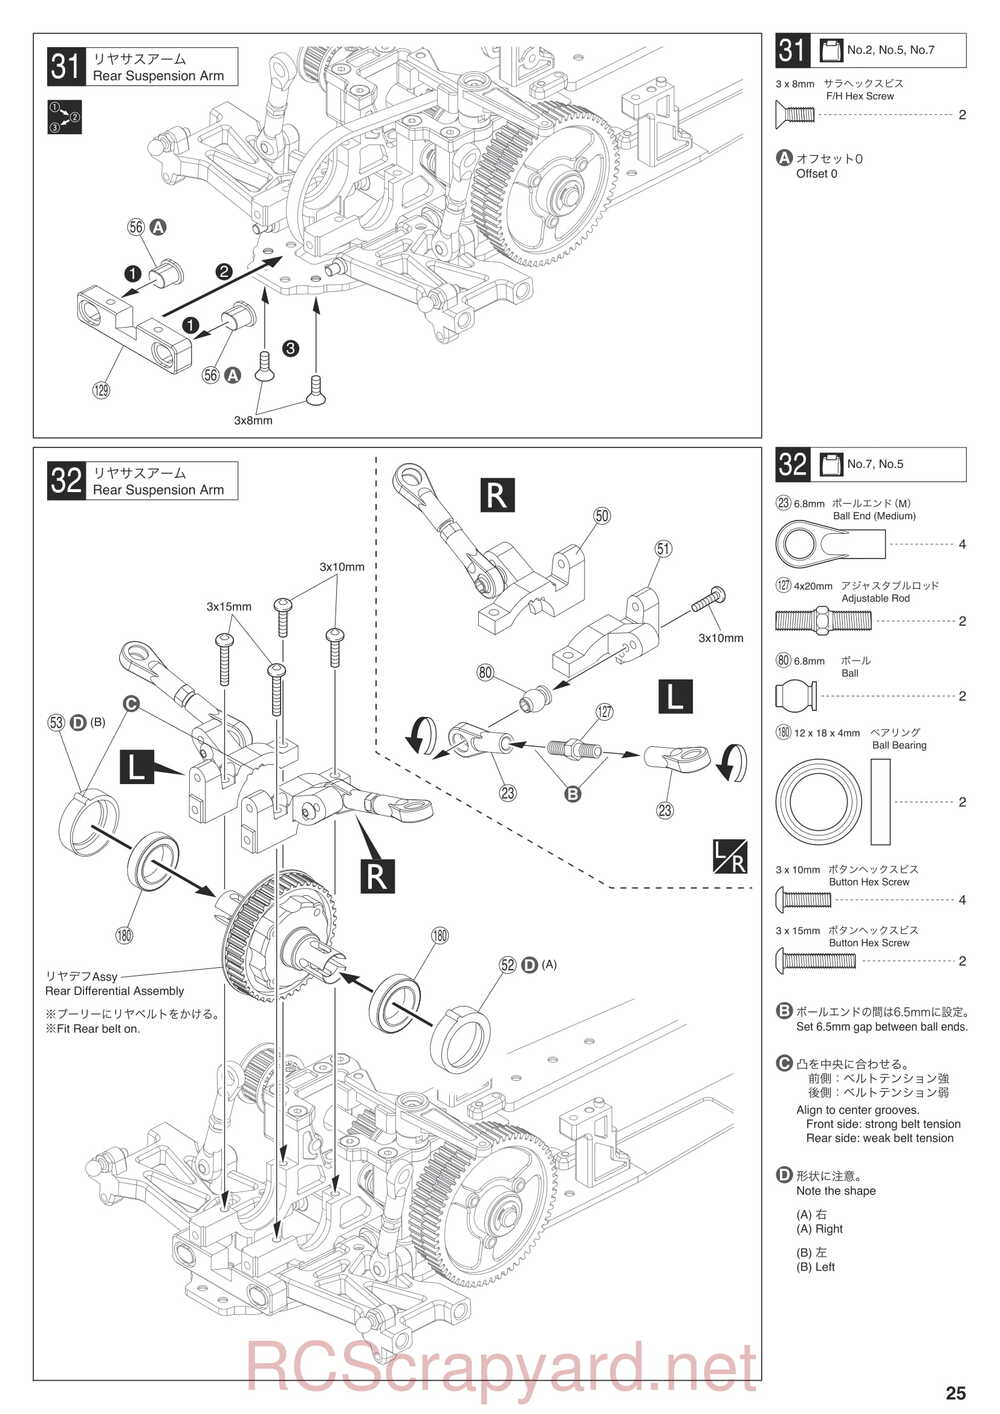 Kyosho - 31265 - V-ONE-R4 - Manual - Page 25